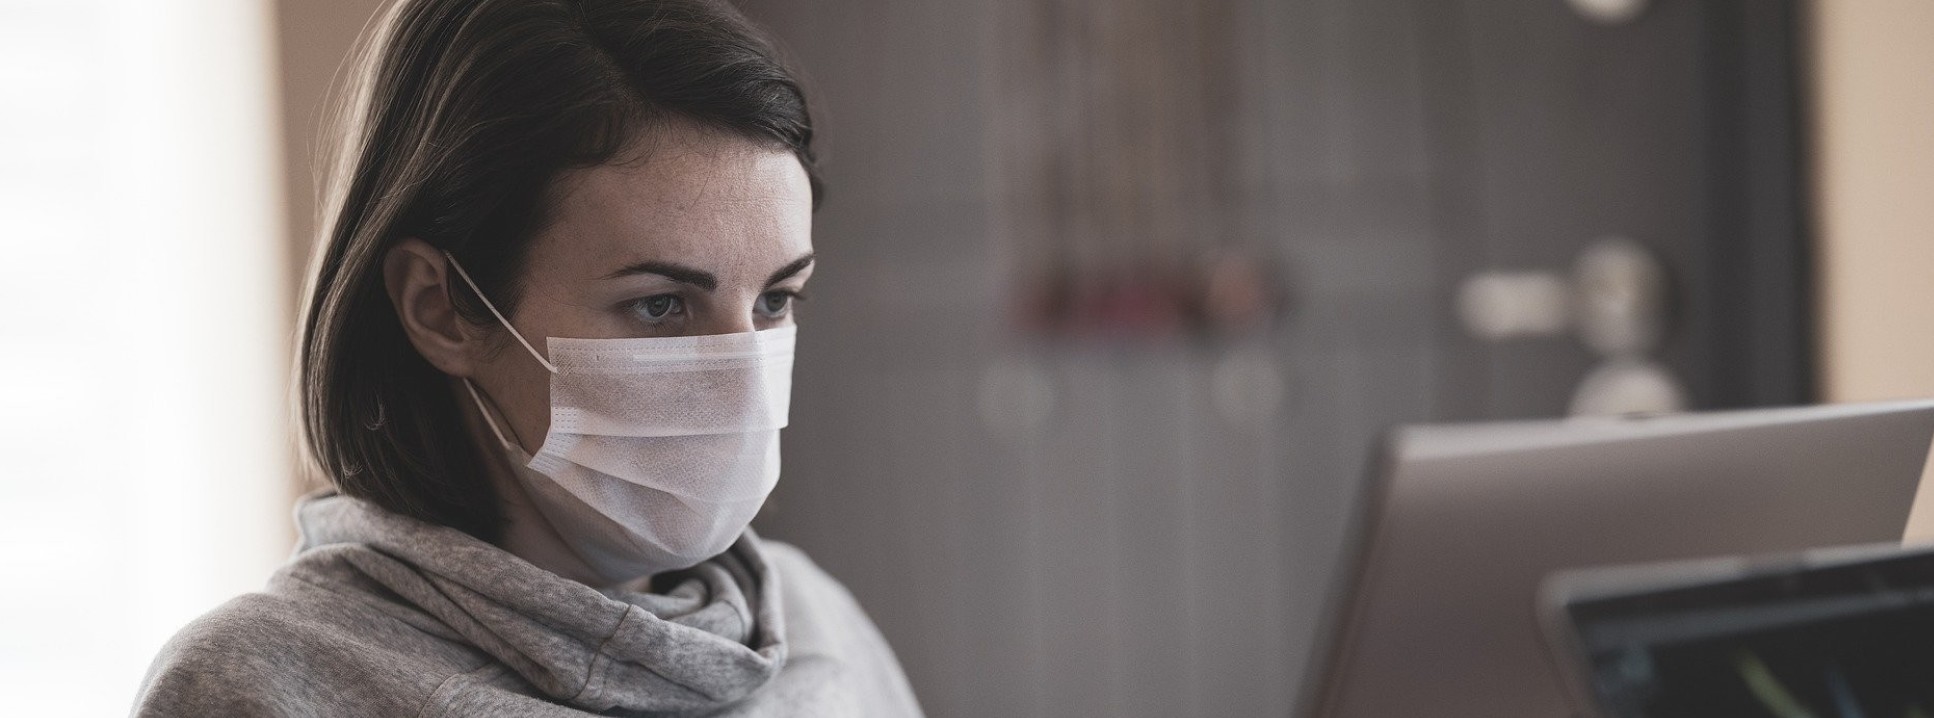 A woman working at a laptop and wearing a coronavirus mask